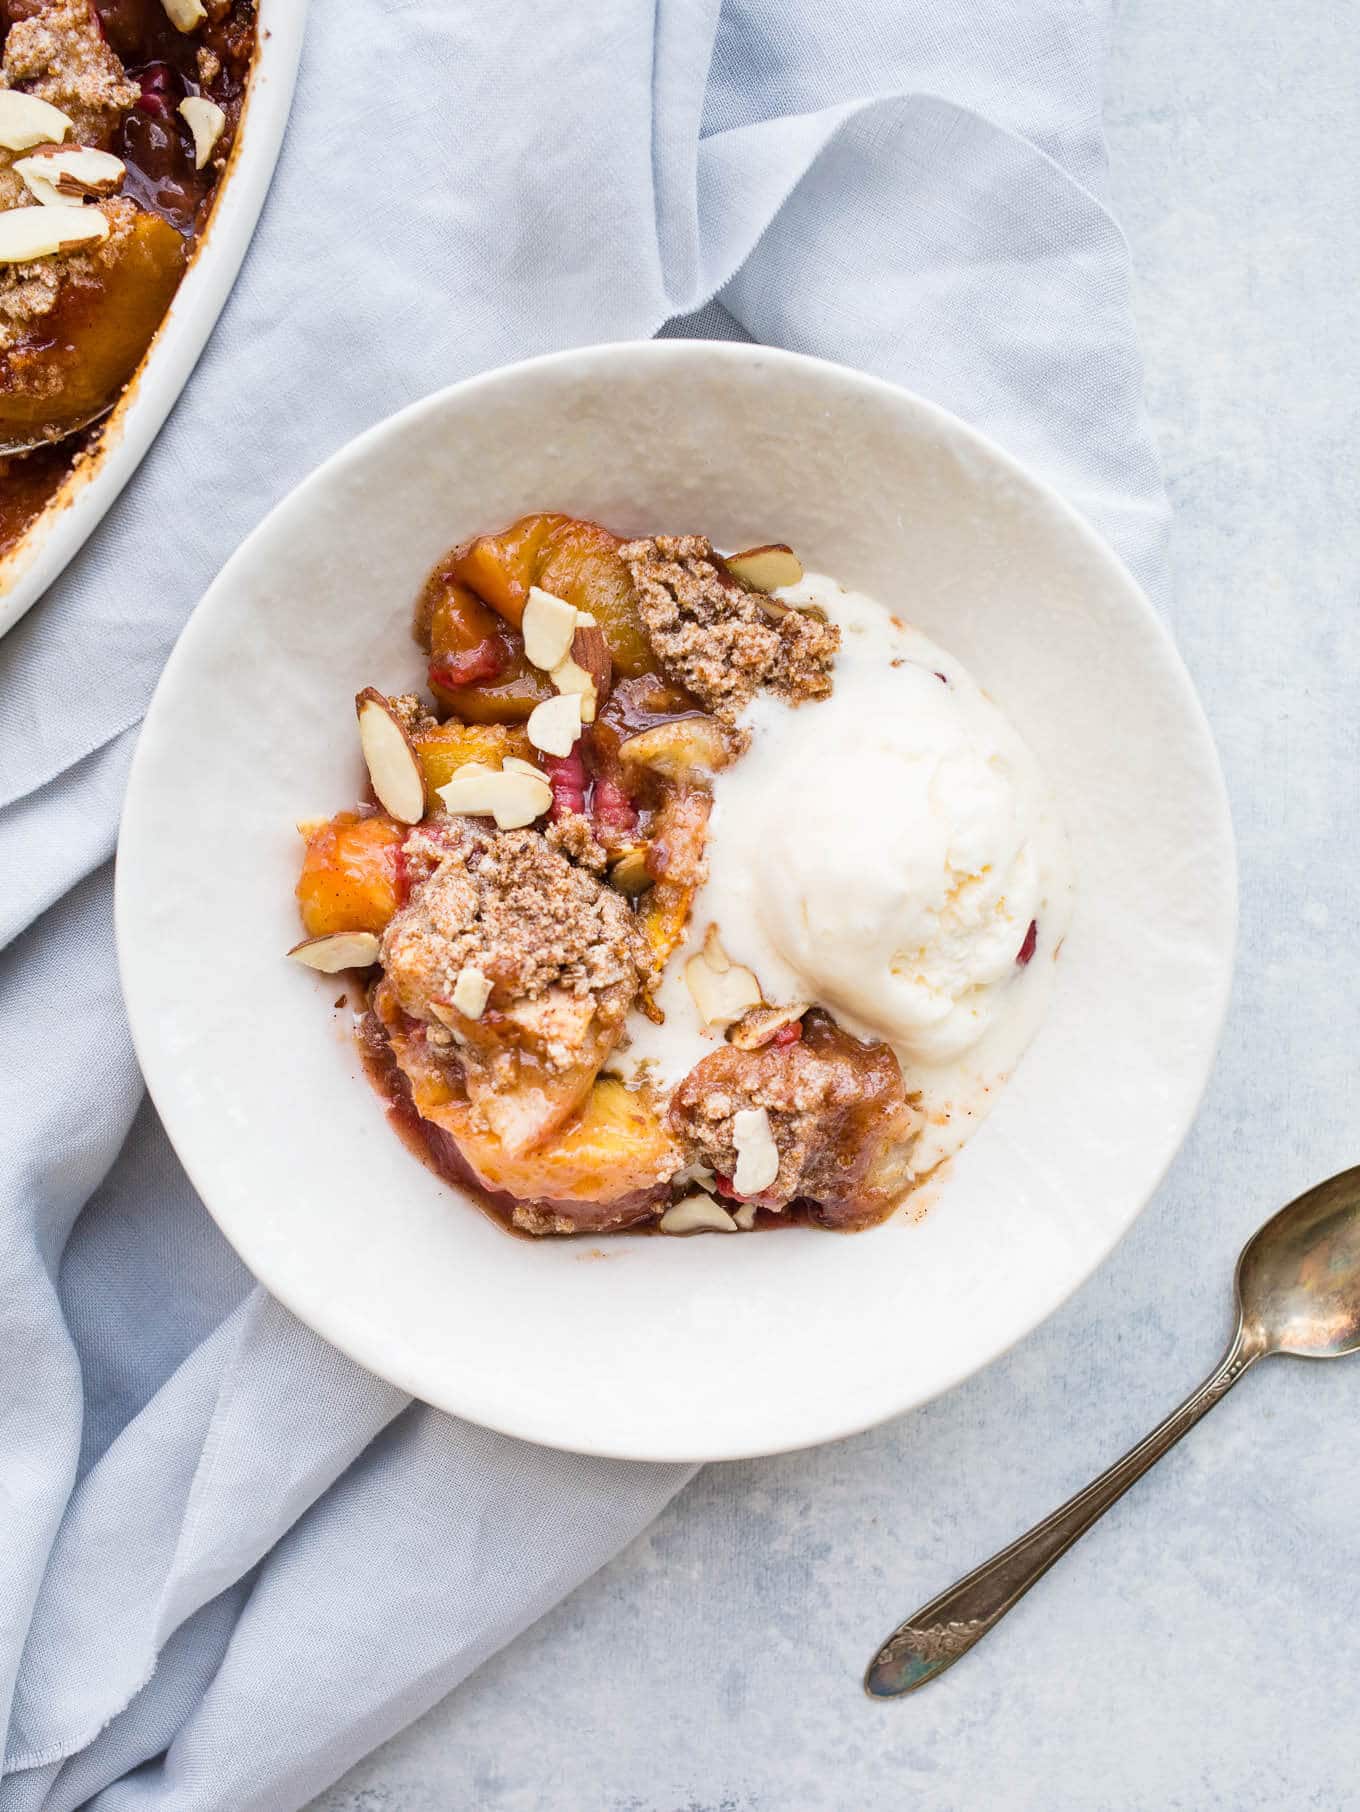 This Gluten-Free Raspberry Peach Crumble uses fresh raspberries and peaches, slivered almonds, almond flour, and unrefined coconut sugar and organic cane sugar. Simple to prepare and delicious with vanilla ice cream.